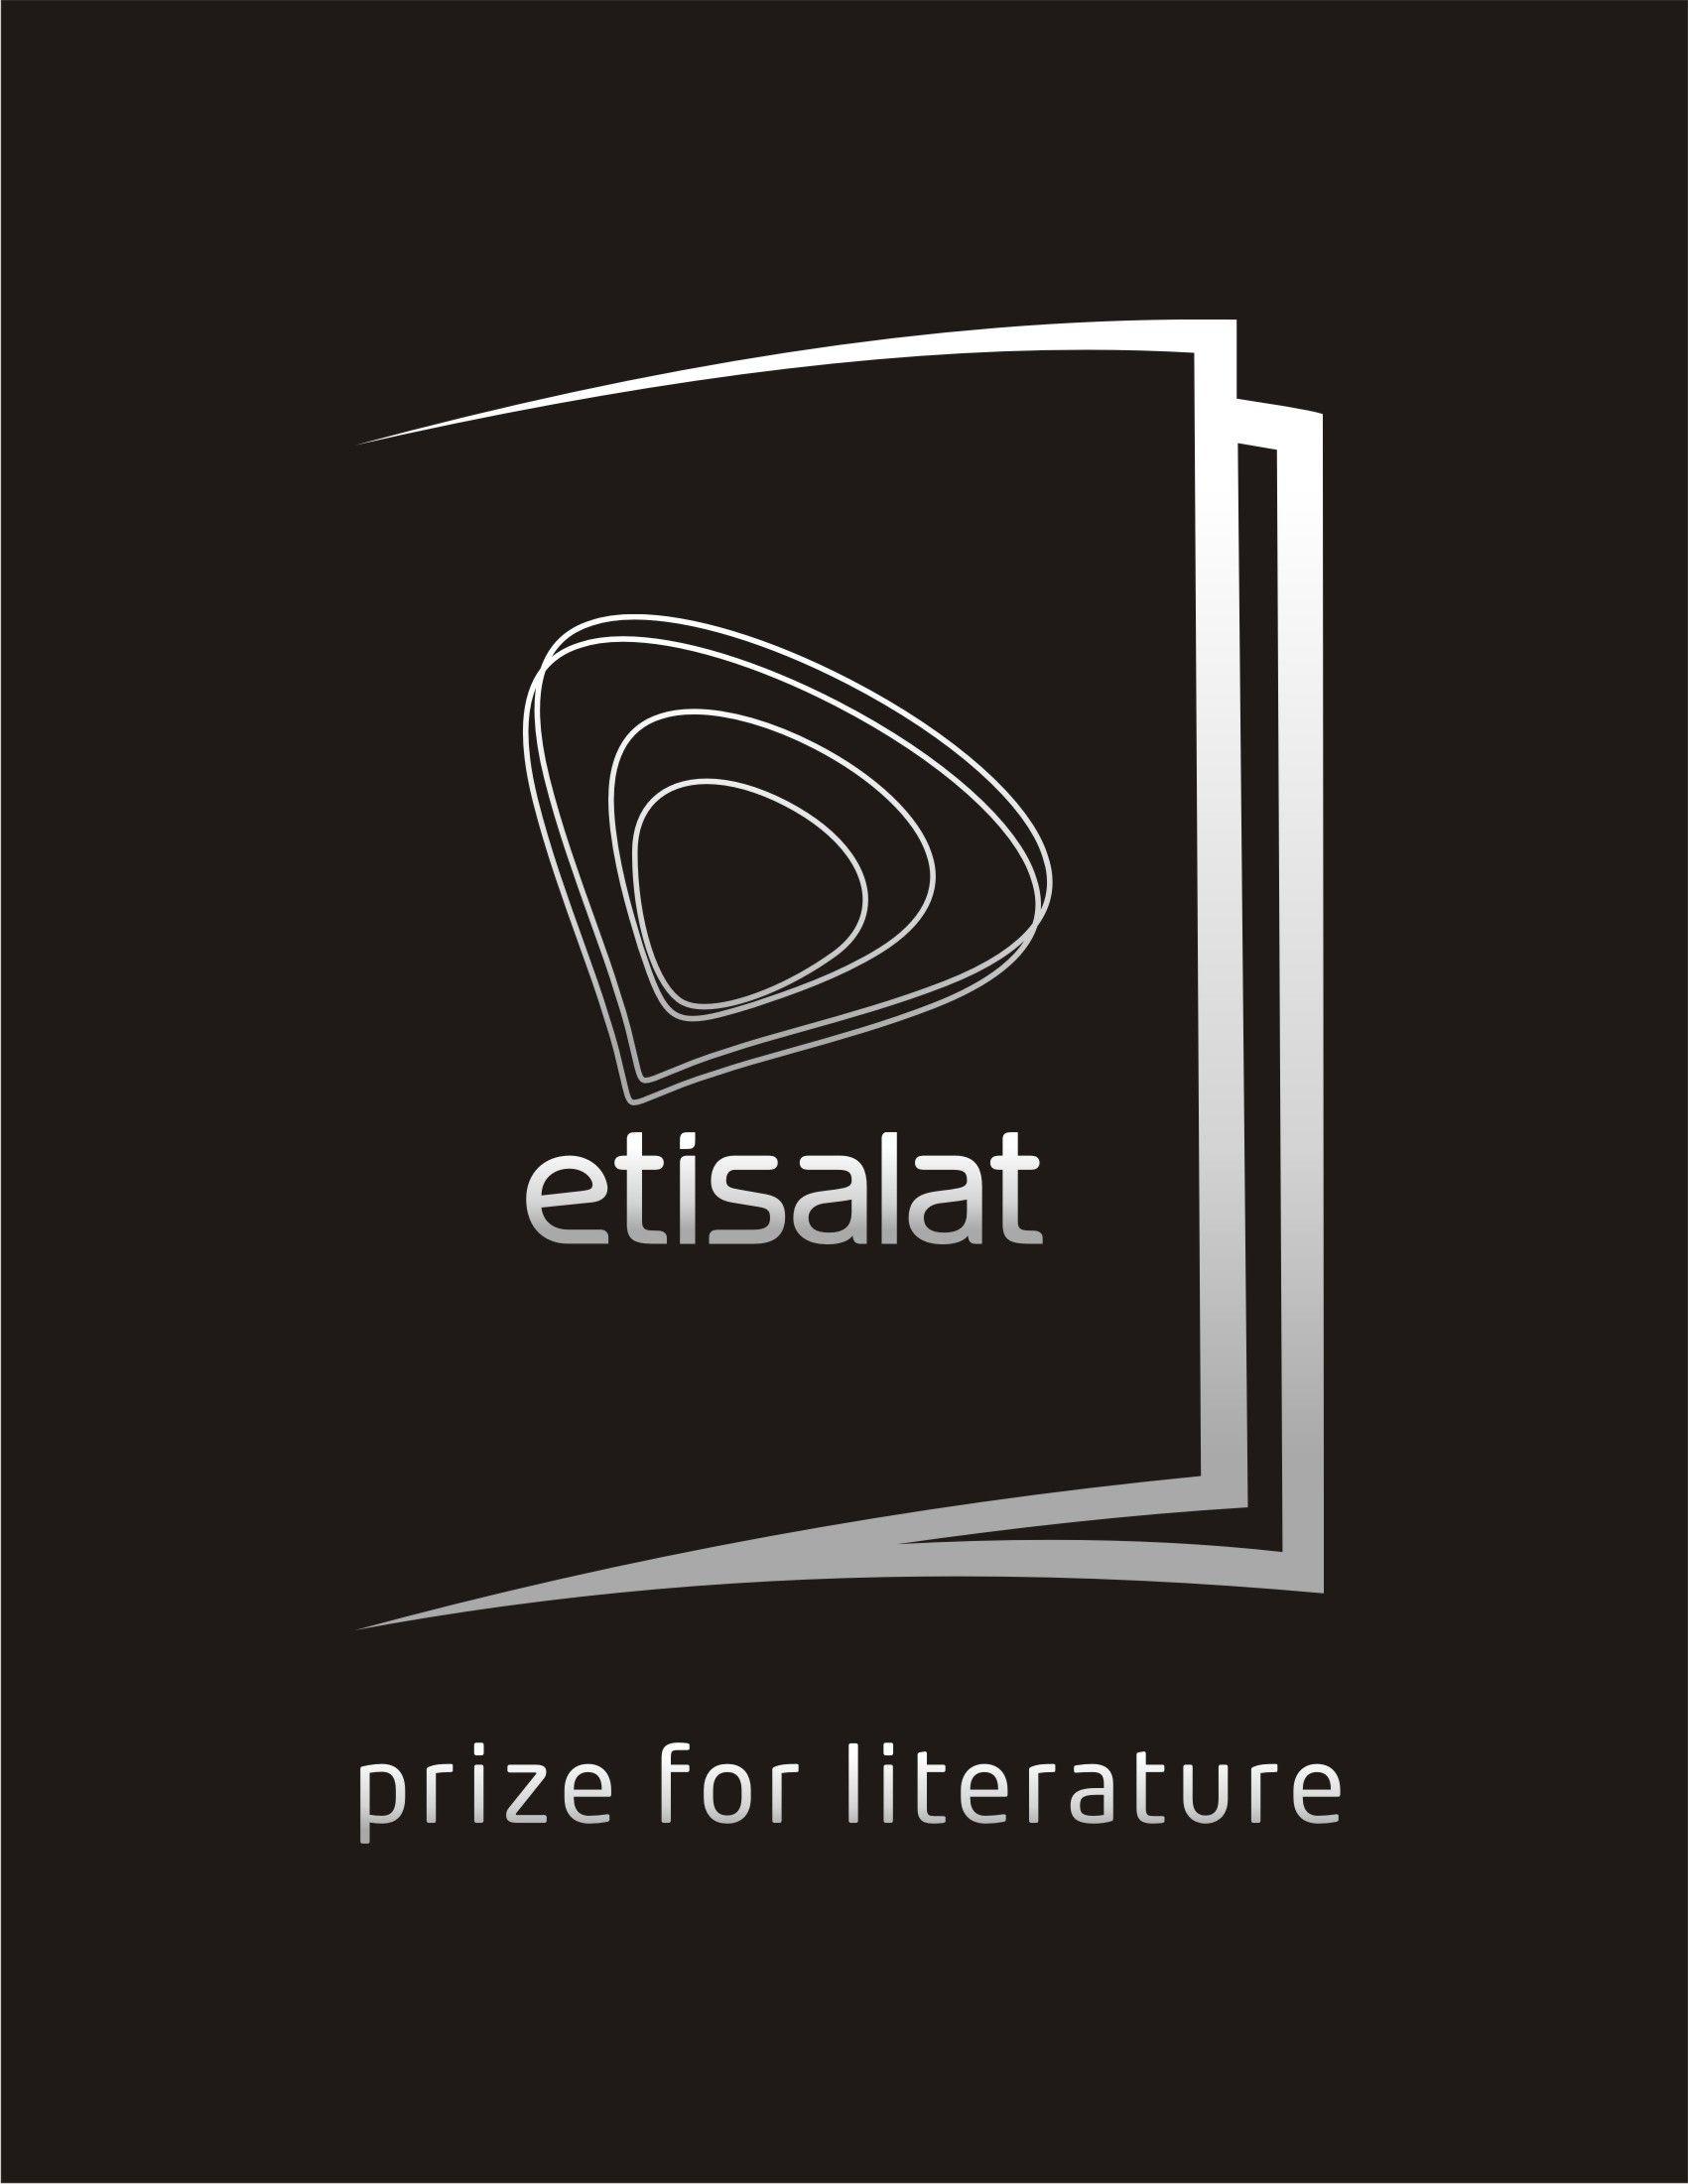 Etisalat Logo - Etisalat Prize for Literature: Call for Entries for 2014 Flash ...